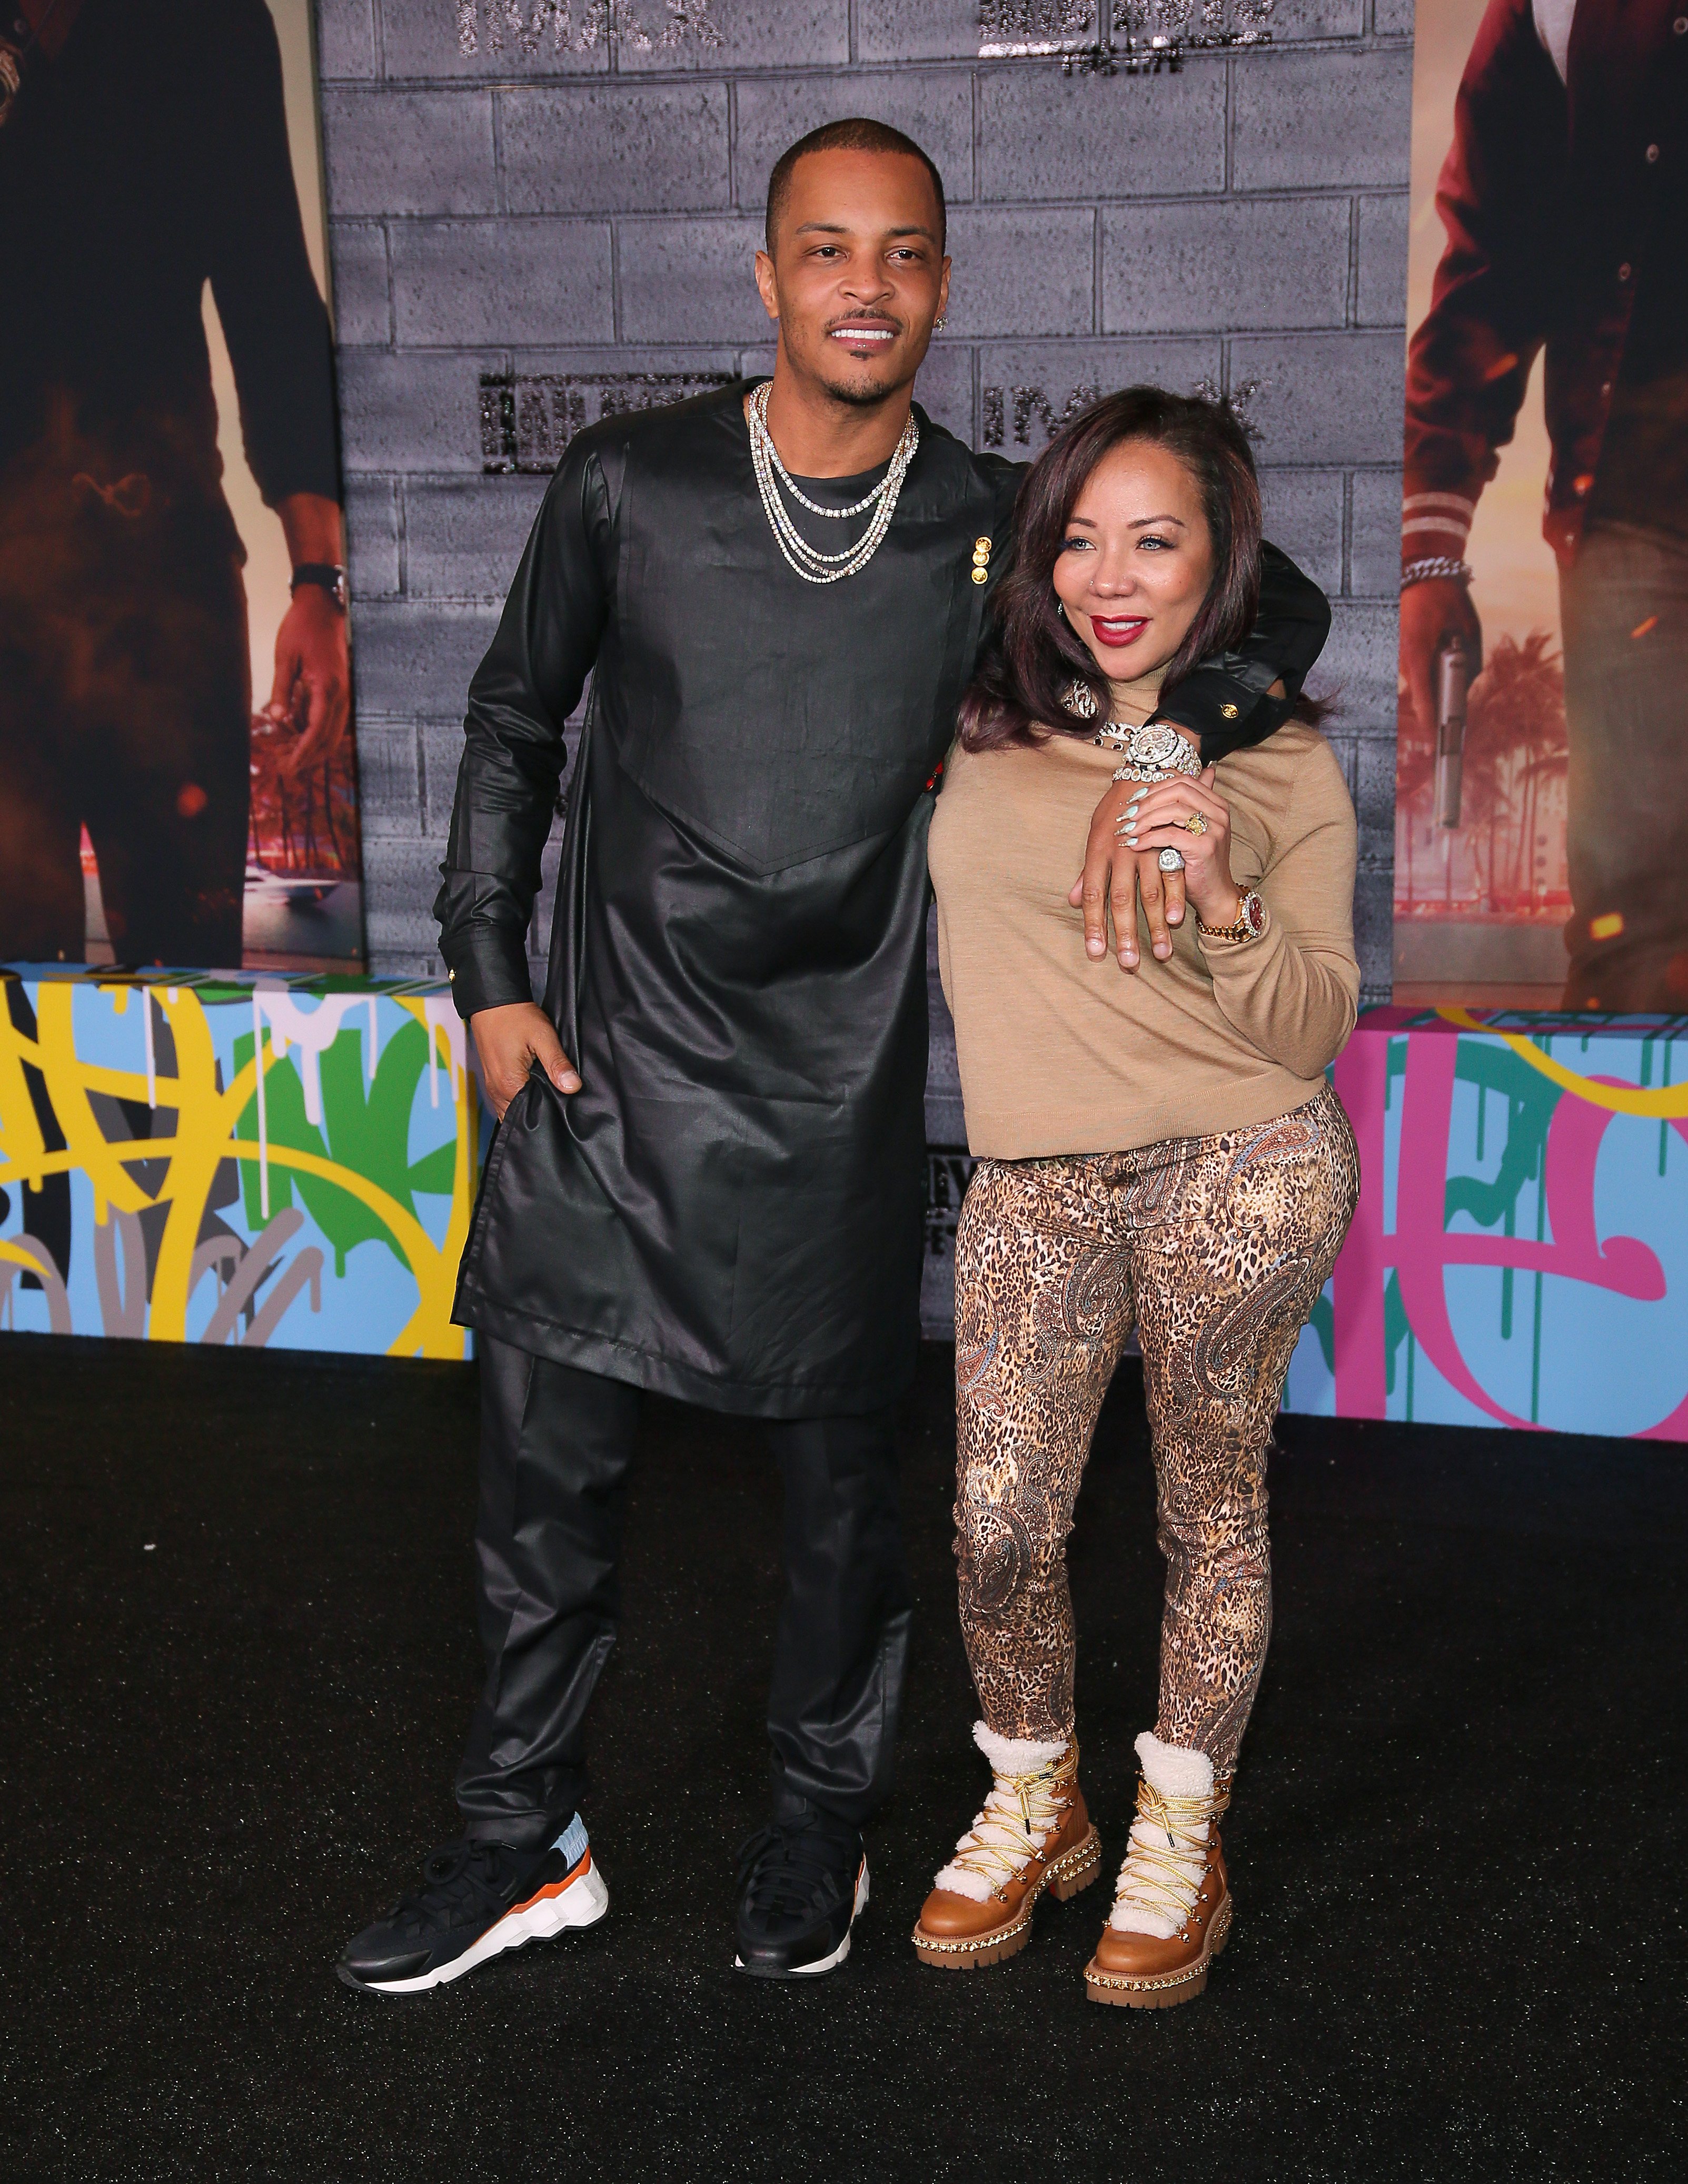 T.I. and Tameka "Tiny" Harris at the world premiere of "Bad Boys for Life" on January 14, 2020 in Hollywood, California. | Photo: Getty Images